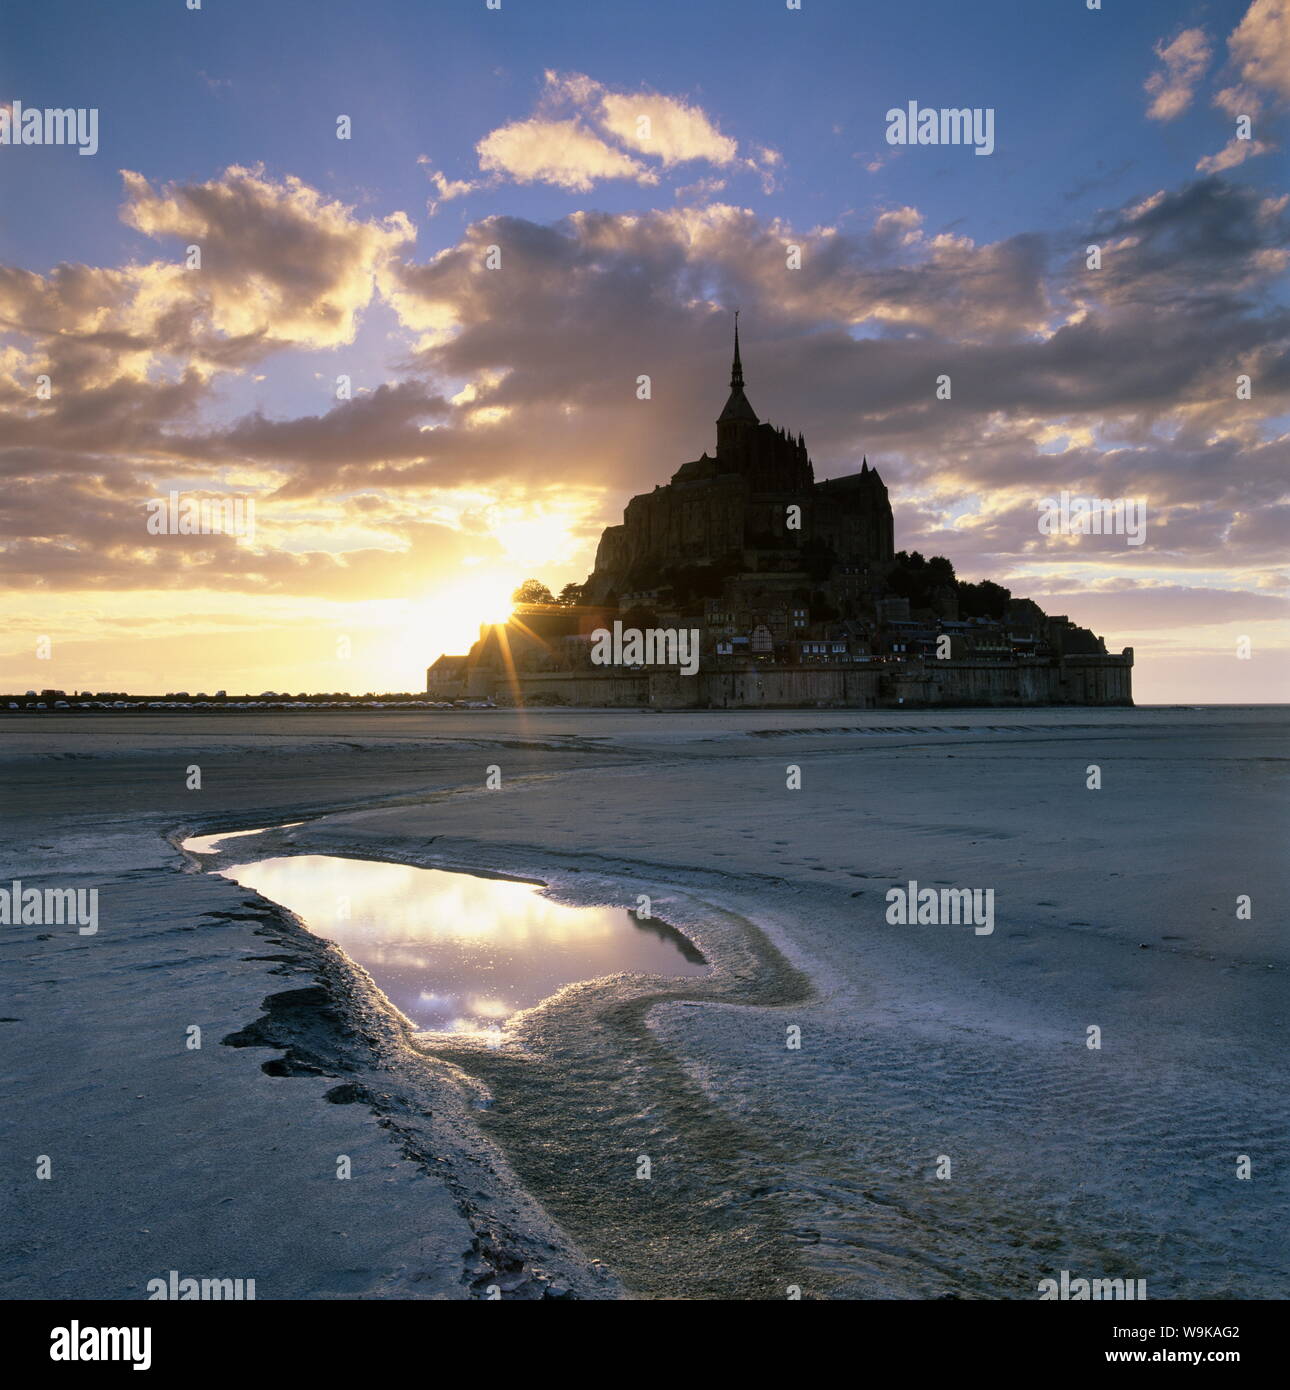 Mont Saint-Michel from the tidal flats at sunset, Mont Saint-Michel, UNESCO World Heritage Site, Normandy, France, Europe Stock Photo